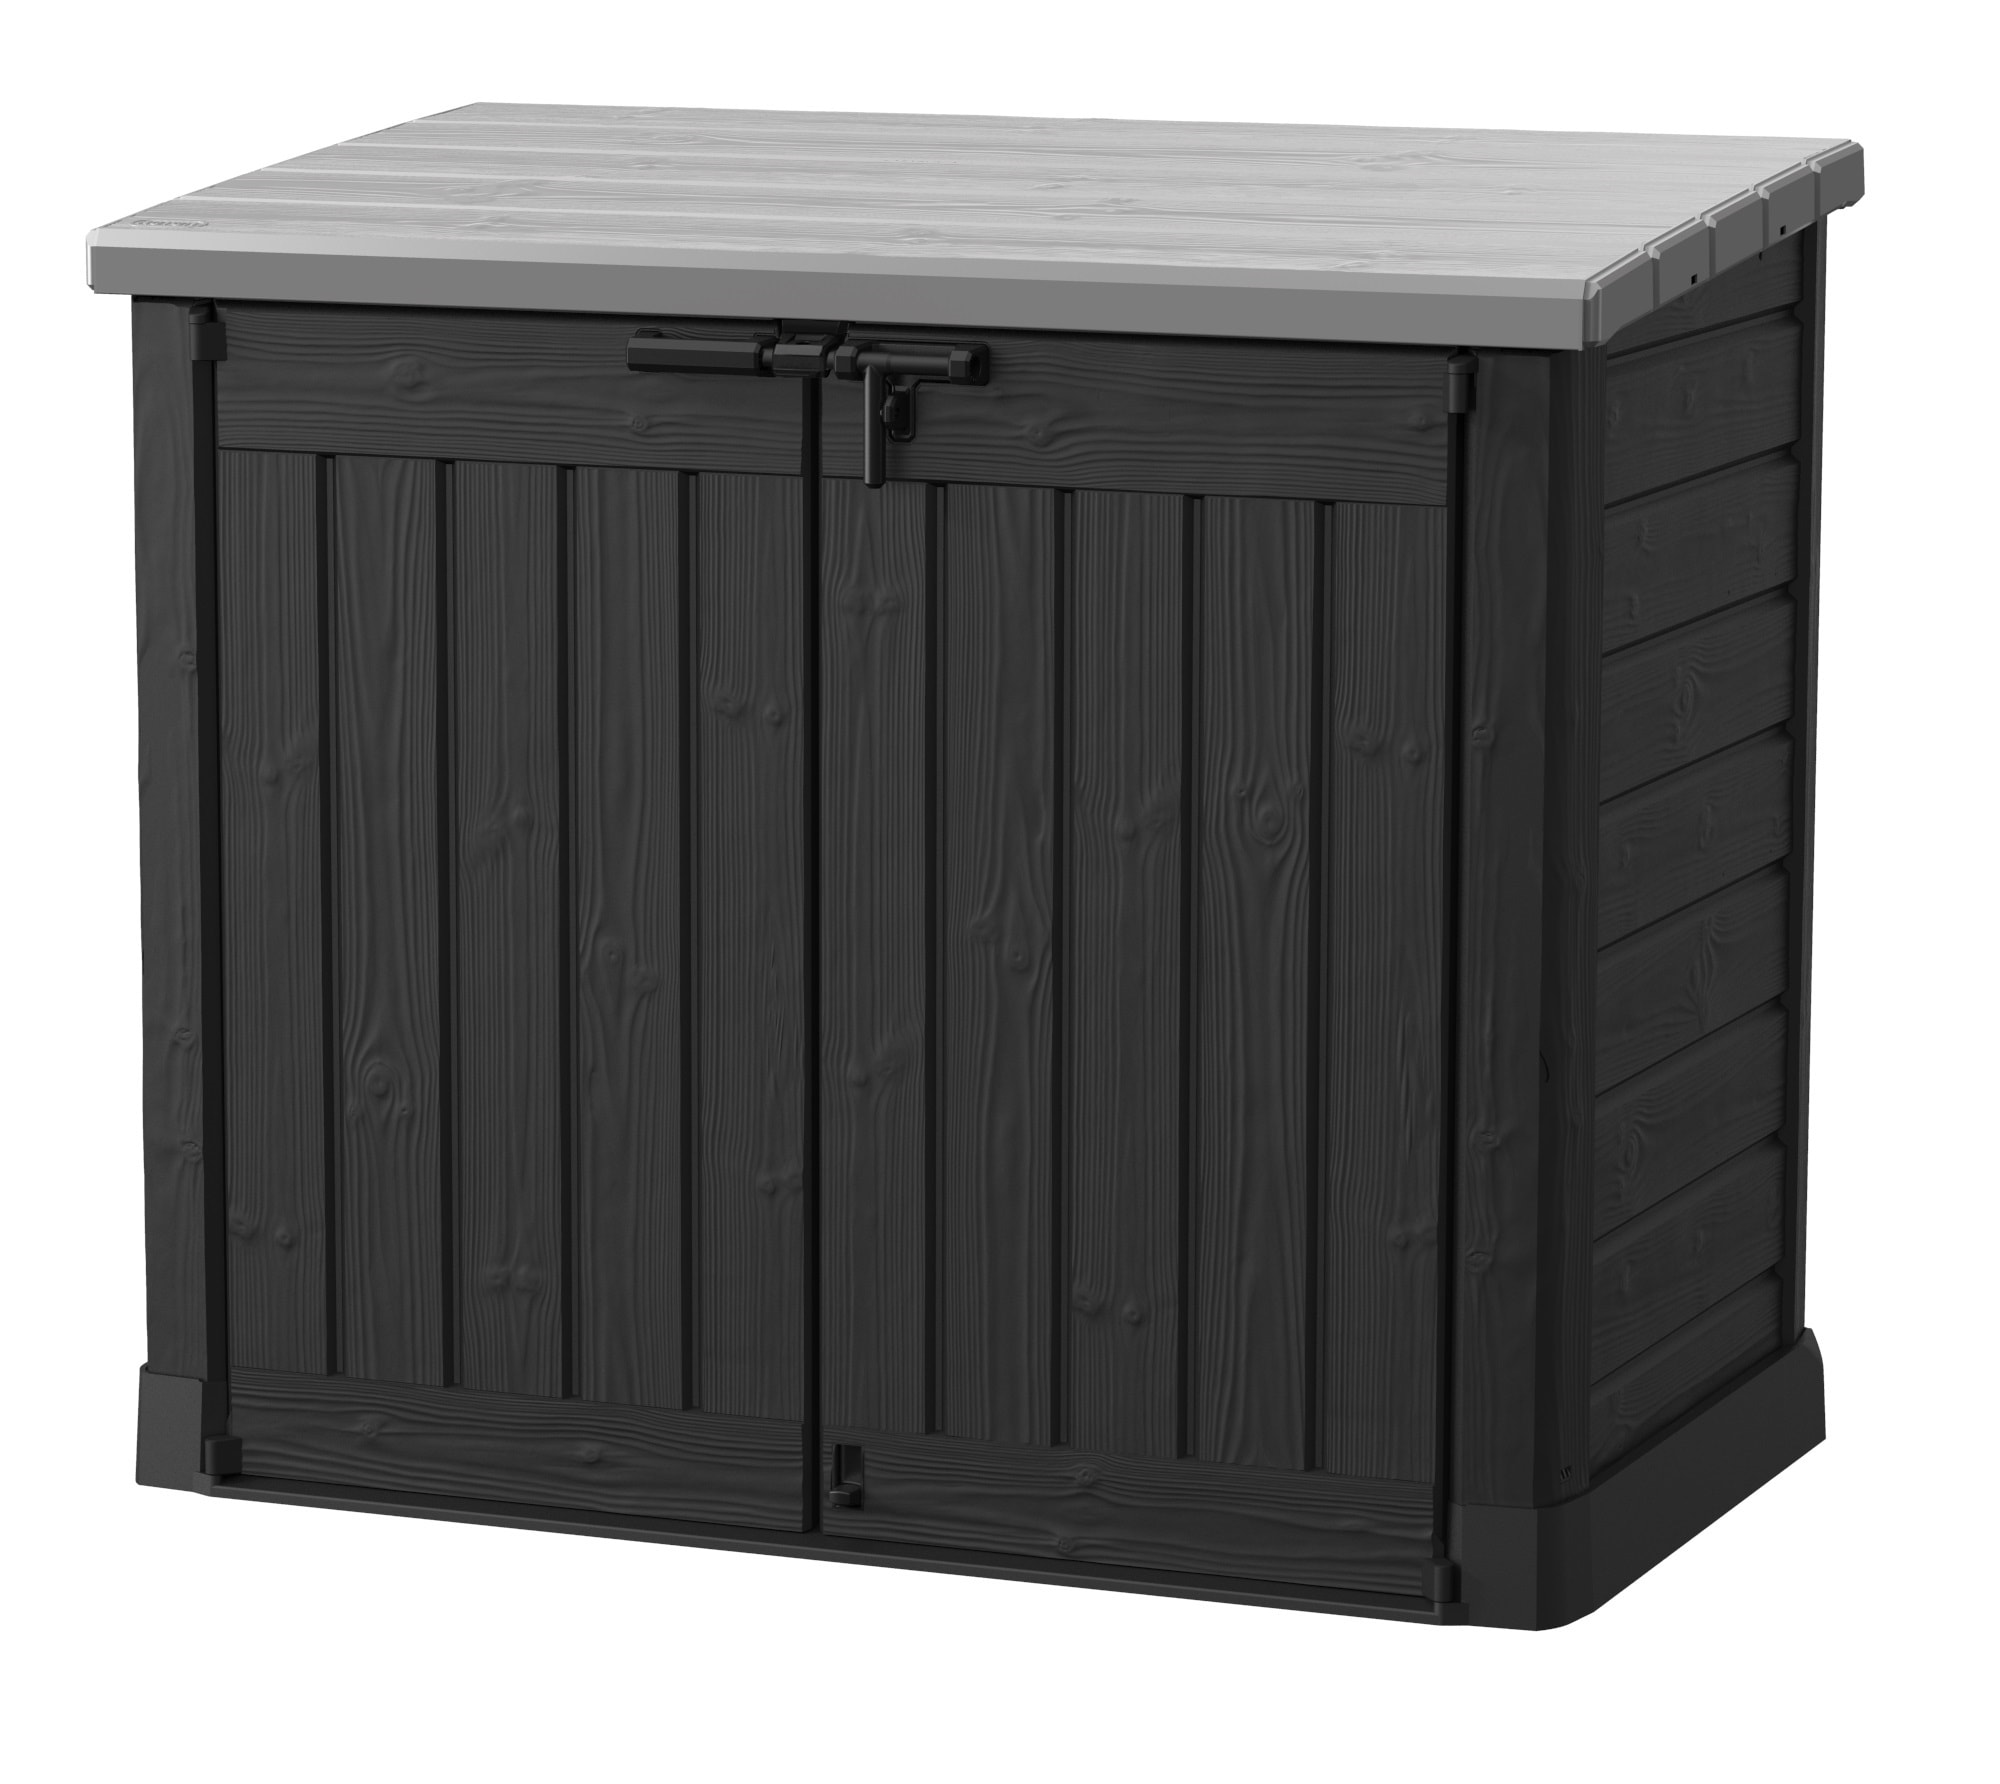 Keter 2.7-ft x 4.8-ft Store It Resin Storage Shed (Floor Included) in Vinyl & Storage department at Lowes.com